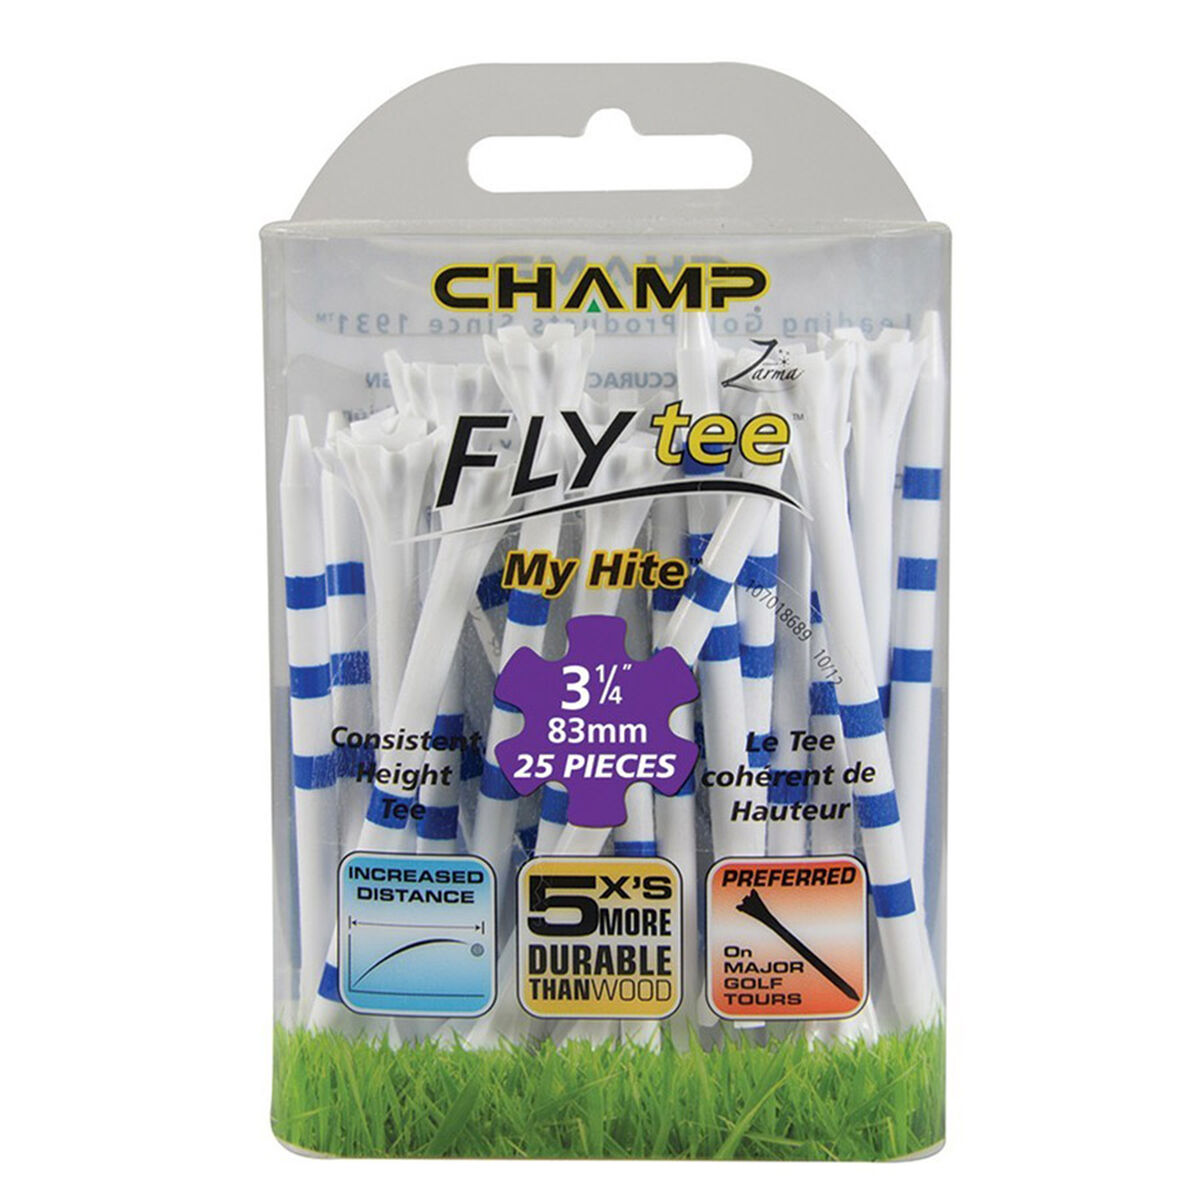 Champ White and Blue Stripe MyHite Fly Pack of 25 Golf Tees, Size: 83mm | American Golf von CHAMP